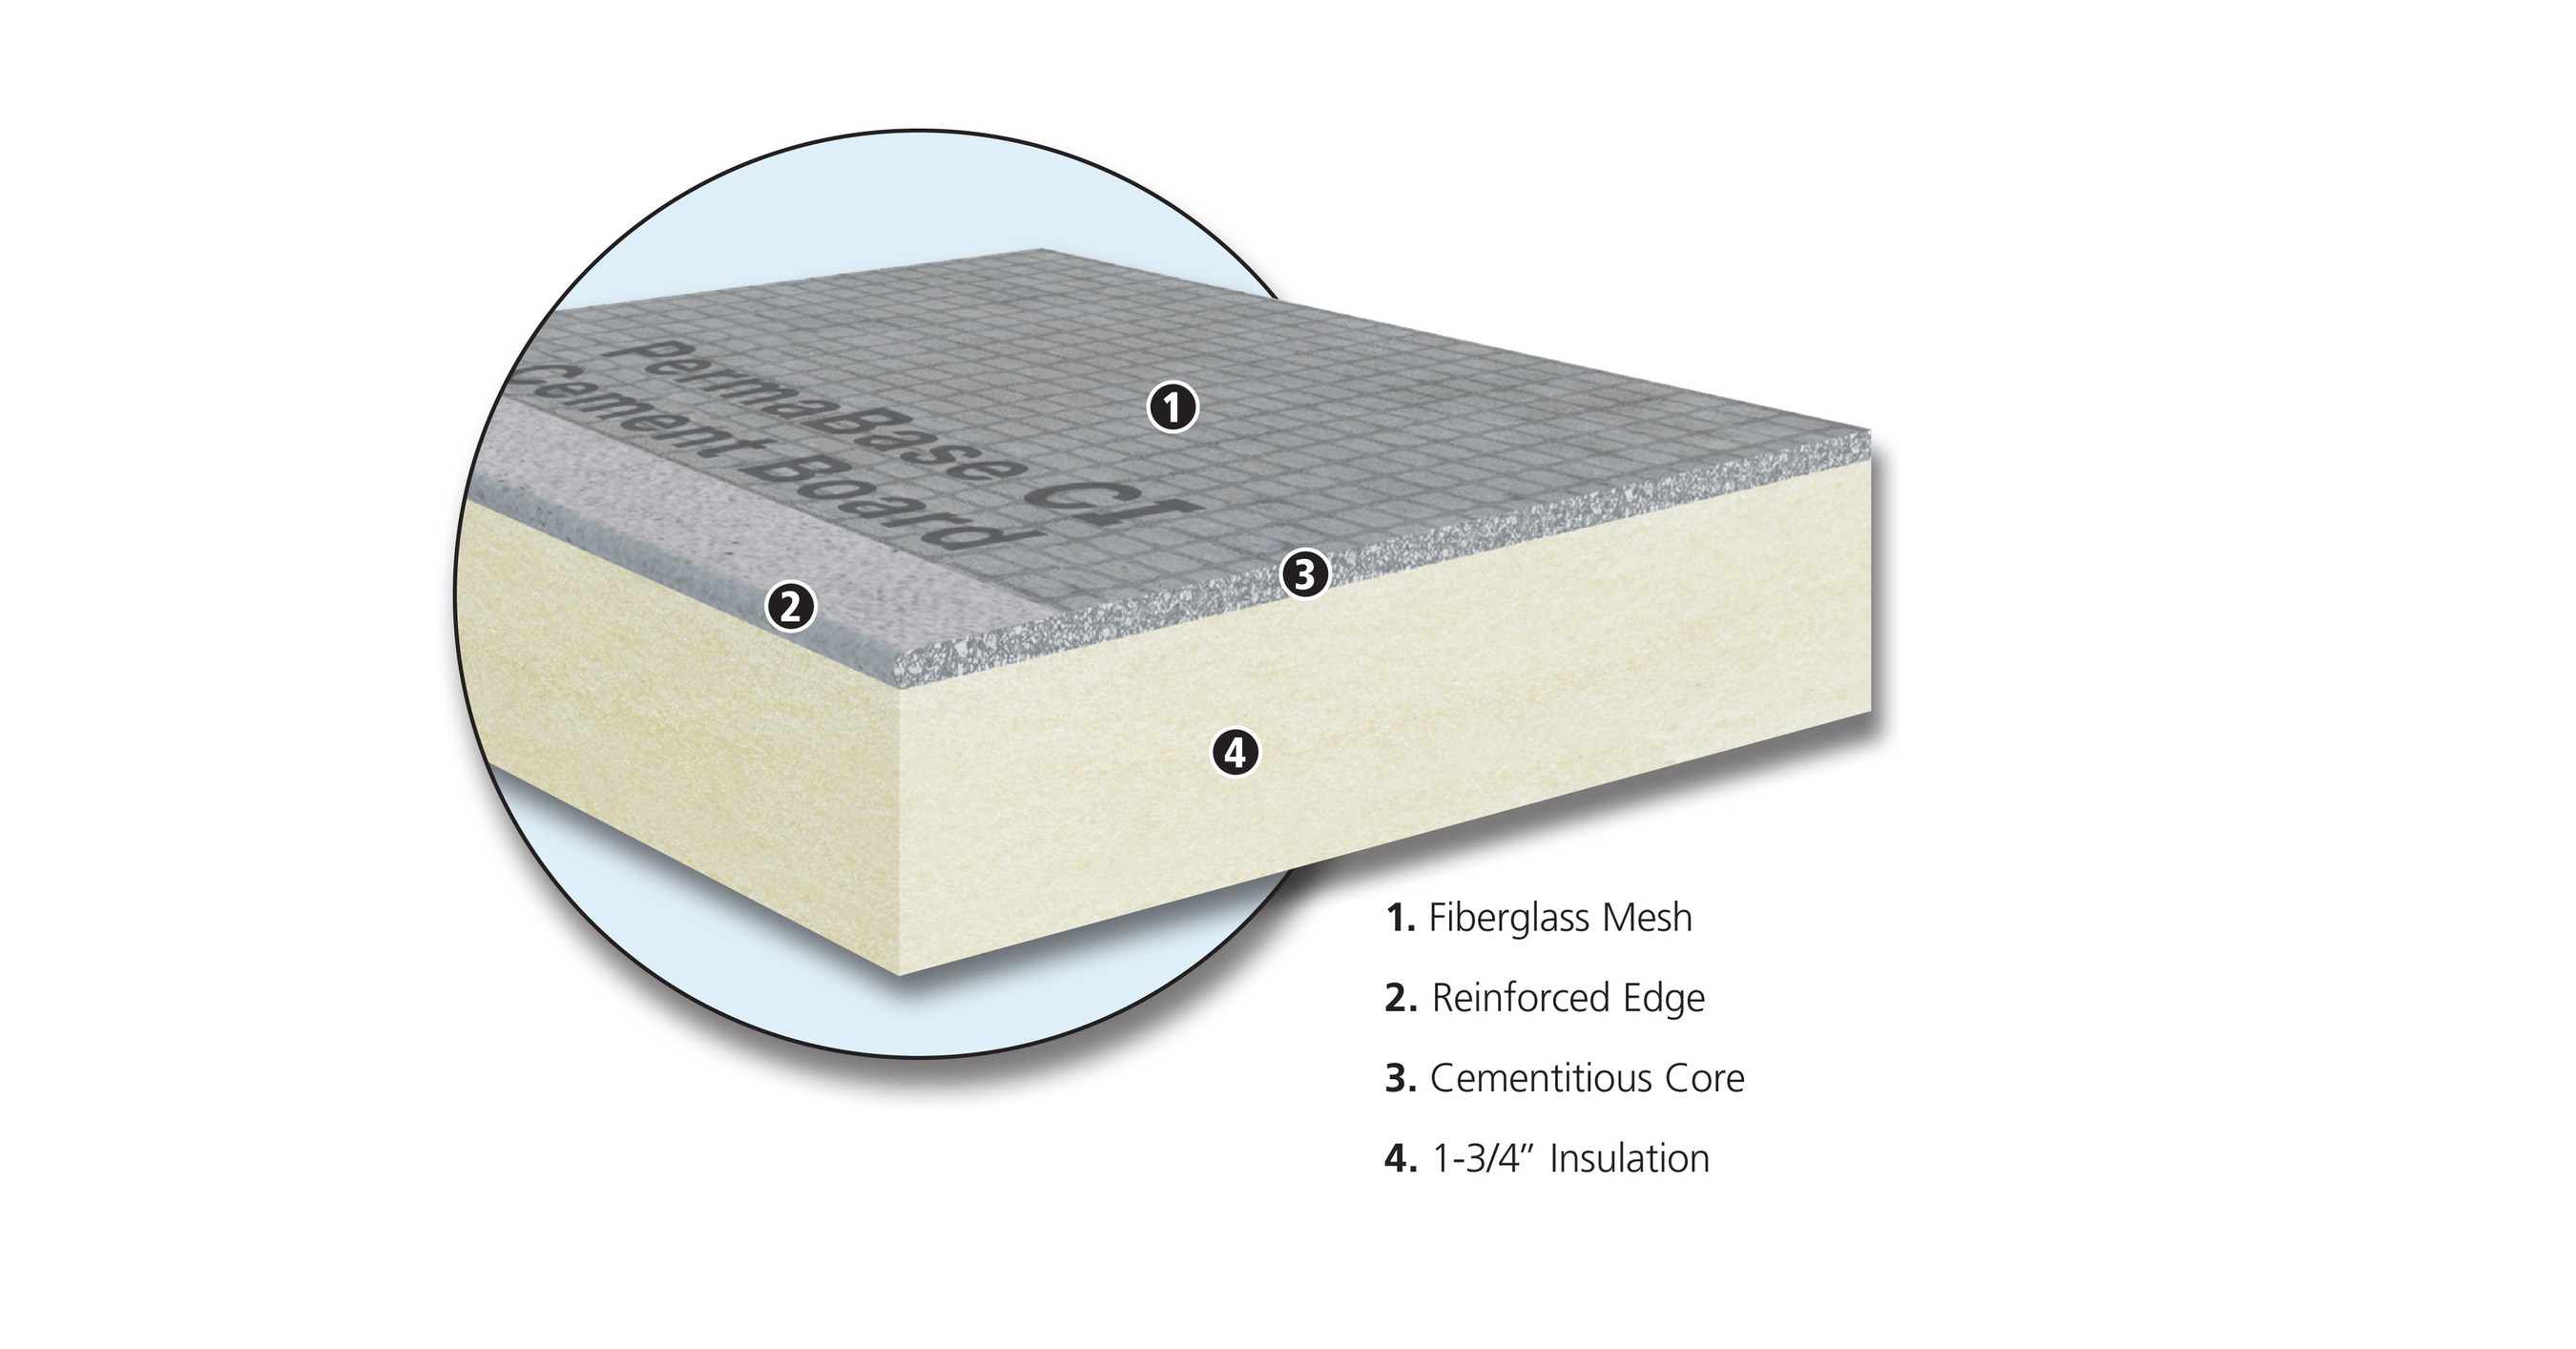 New PermaBase CI Insulated Cement Board™ Being Introduced Today At The